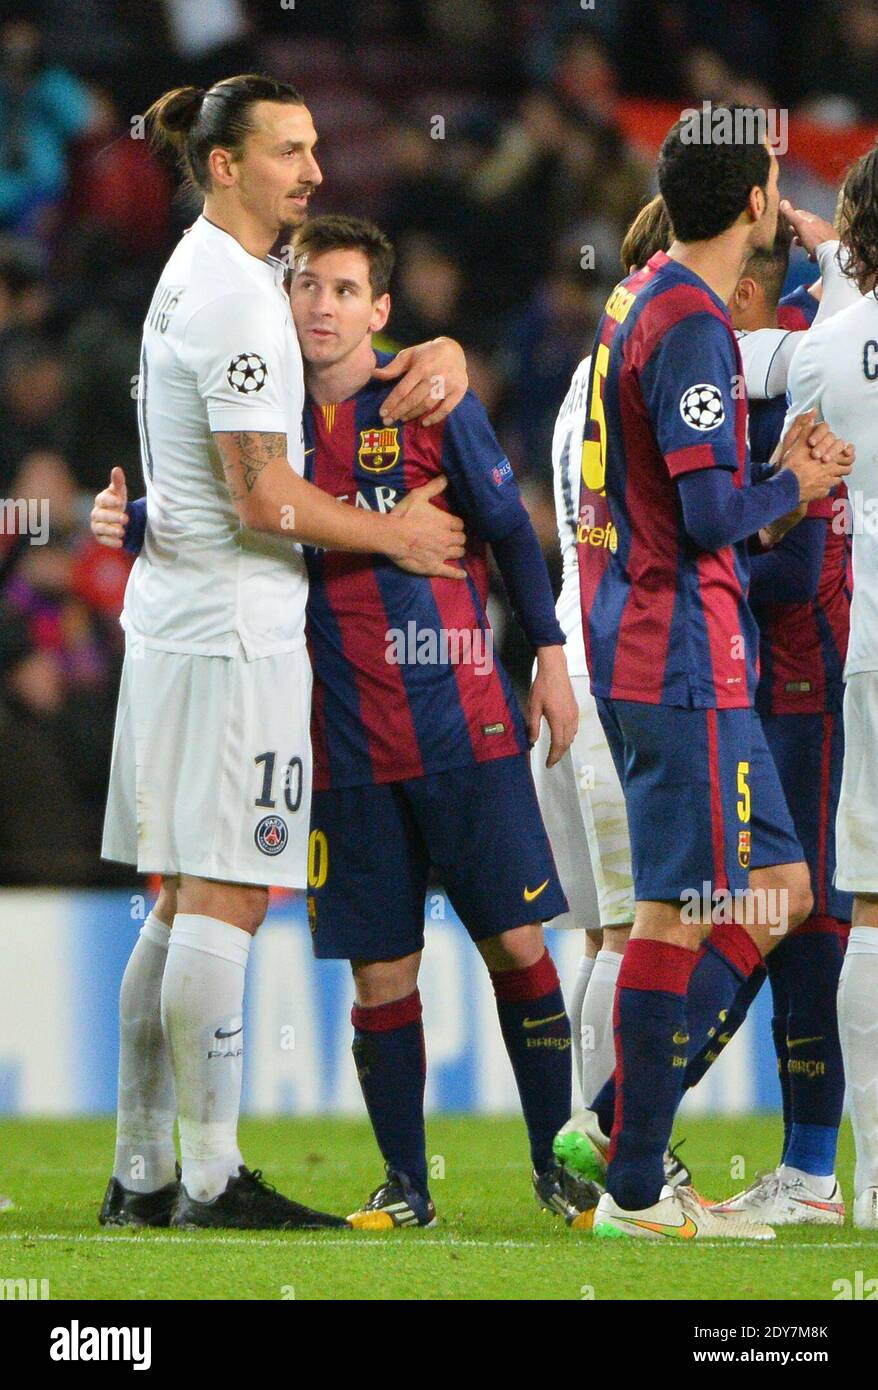 PSG's Zlatan Ibrahimovic with Barcelona's Lionel Messi during the UEFA  Champions League soccer match, FC Barcelona Vs Paris Saint-Germain at Camp  Nou in Barcelone, Spain on December 10, 20114. Barcelona won 3-1.